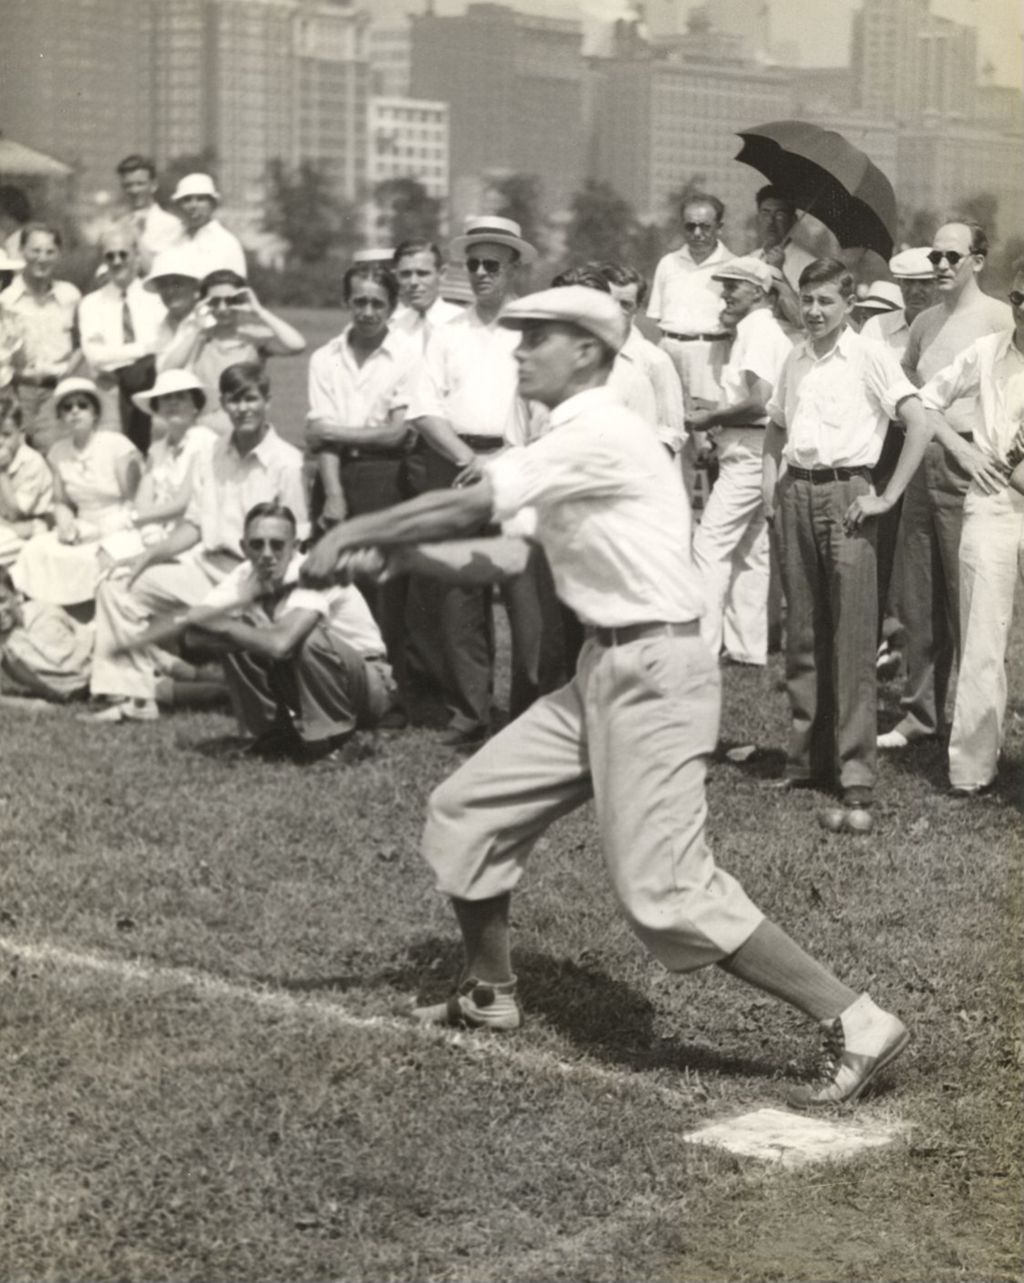 Miniature of A batter playing in a softball game between the Chicago Symphony Orchestra and the Detroit Symphony Orchestra